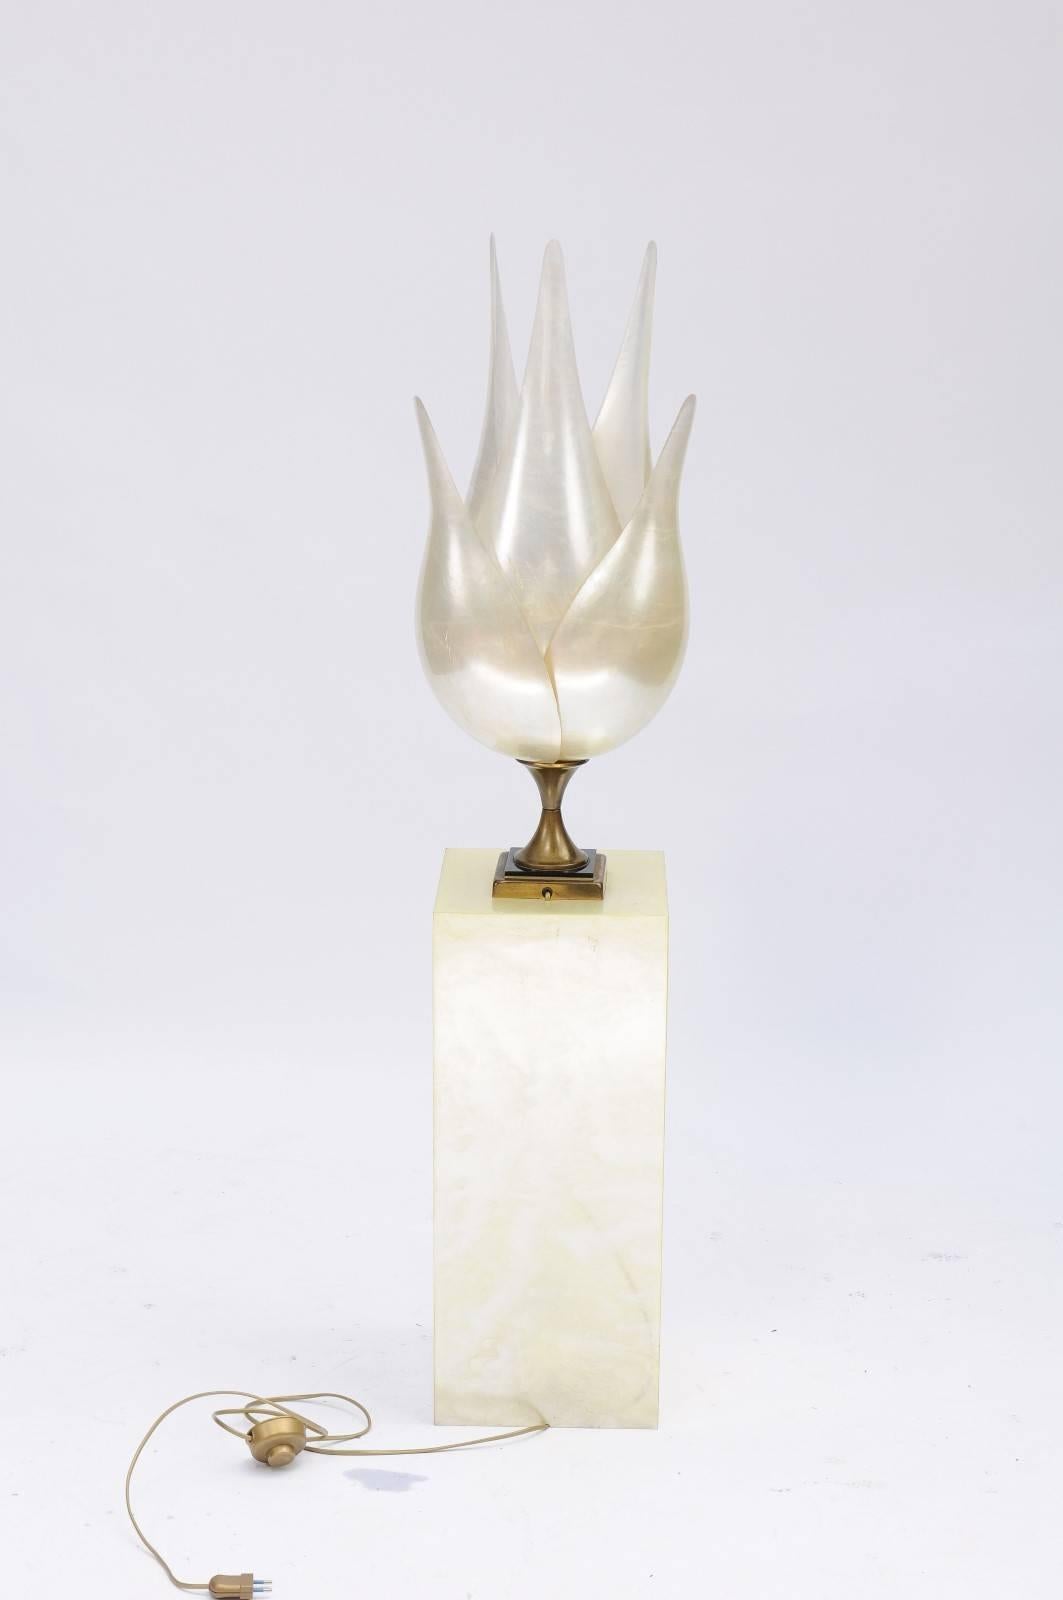 20th Century Single Maison Rougier Six-Petal Flower Shaped Lamp with Tall Stand, circa 1970